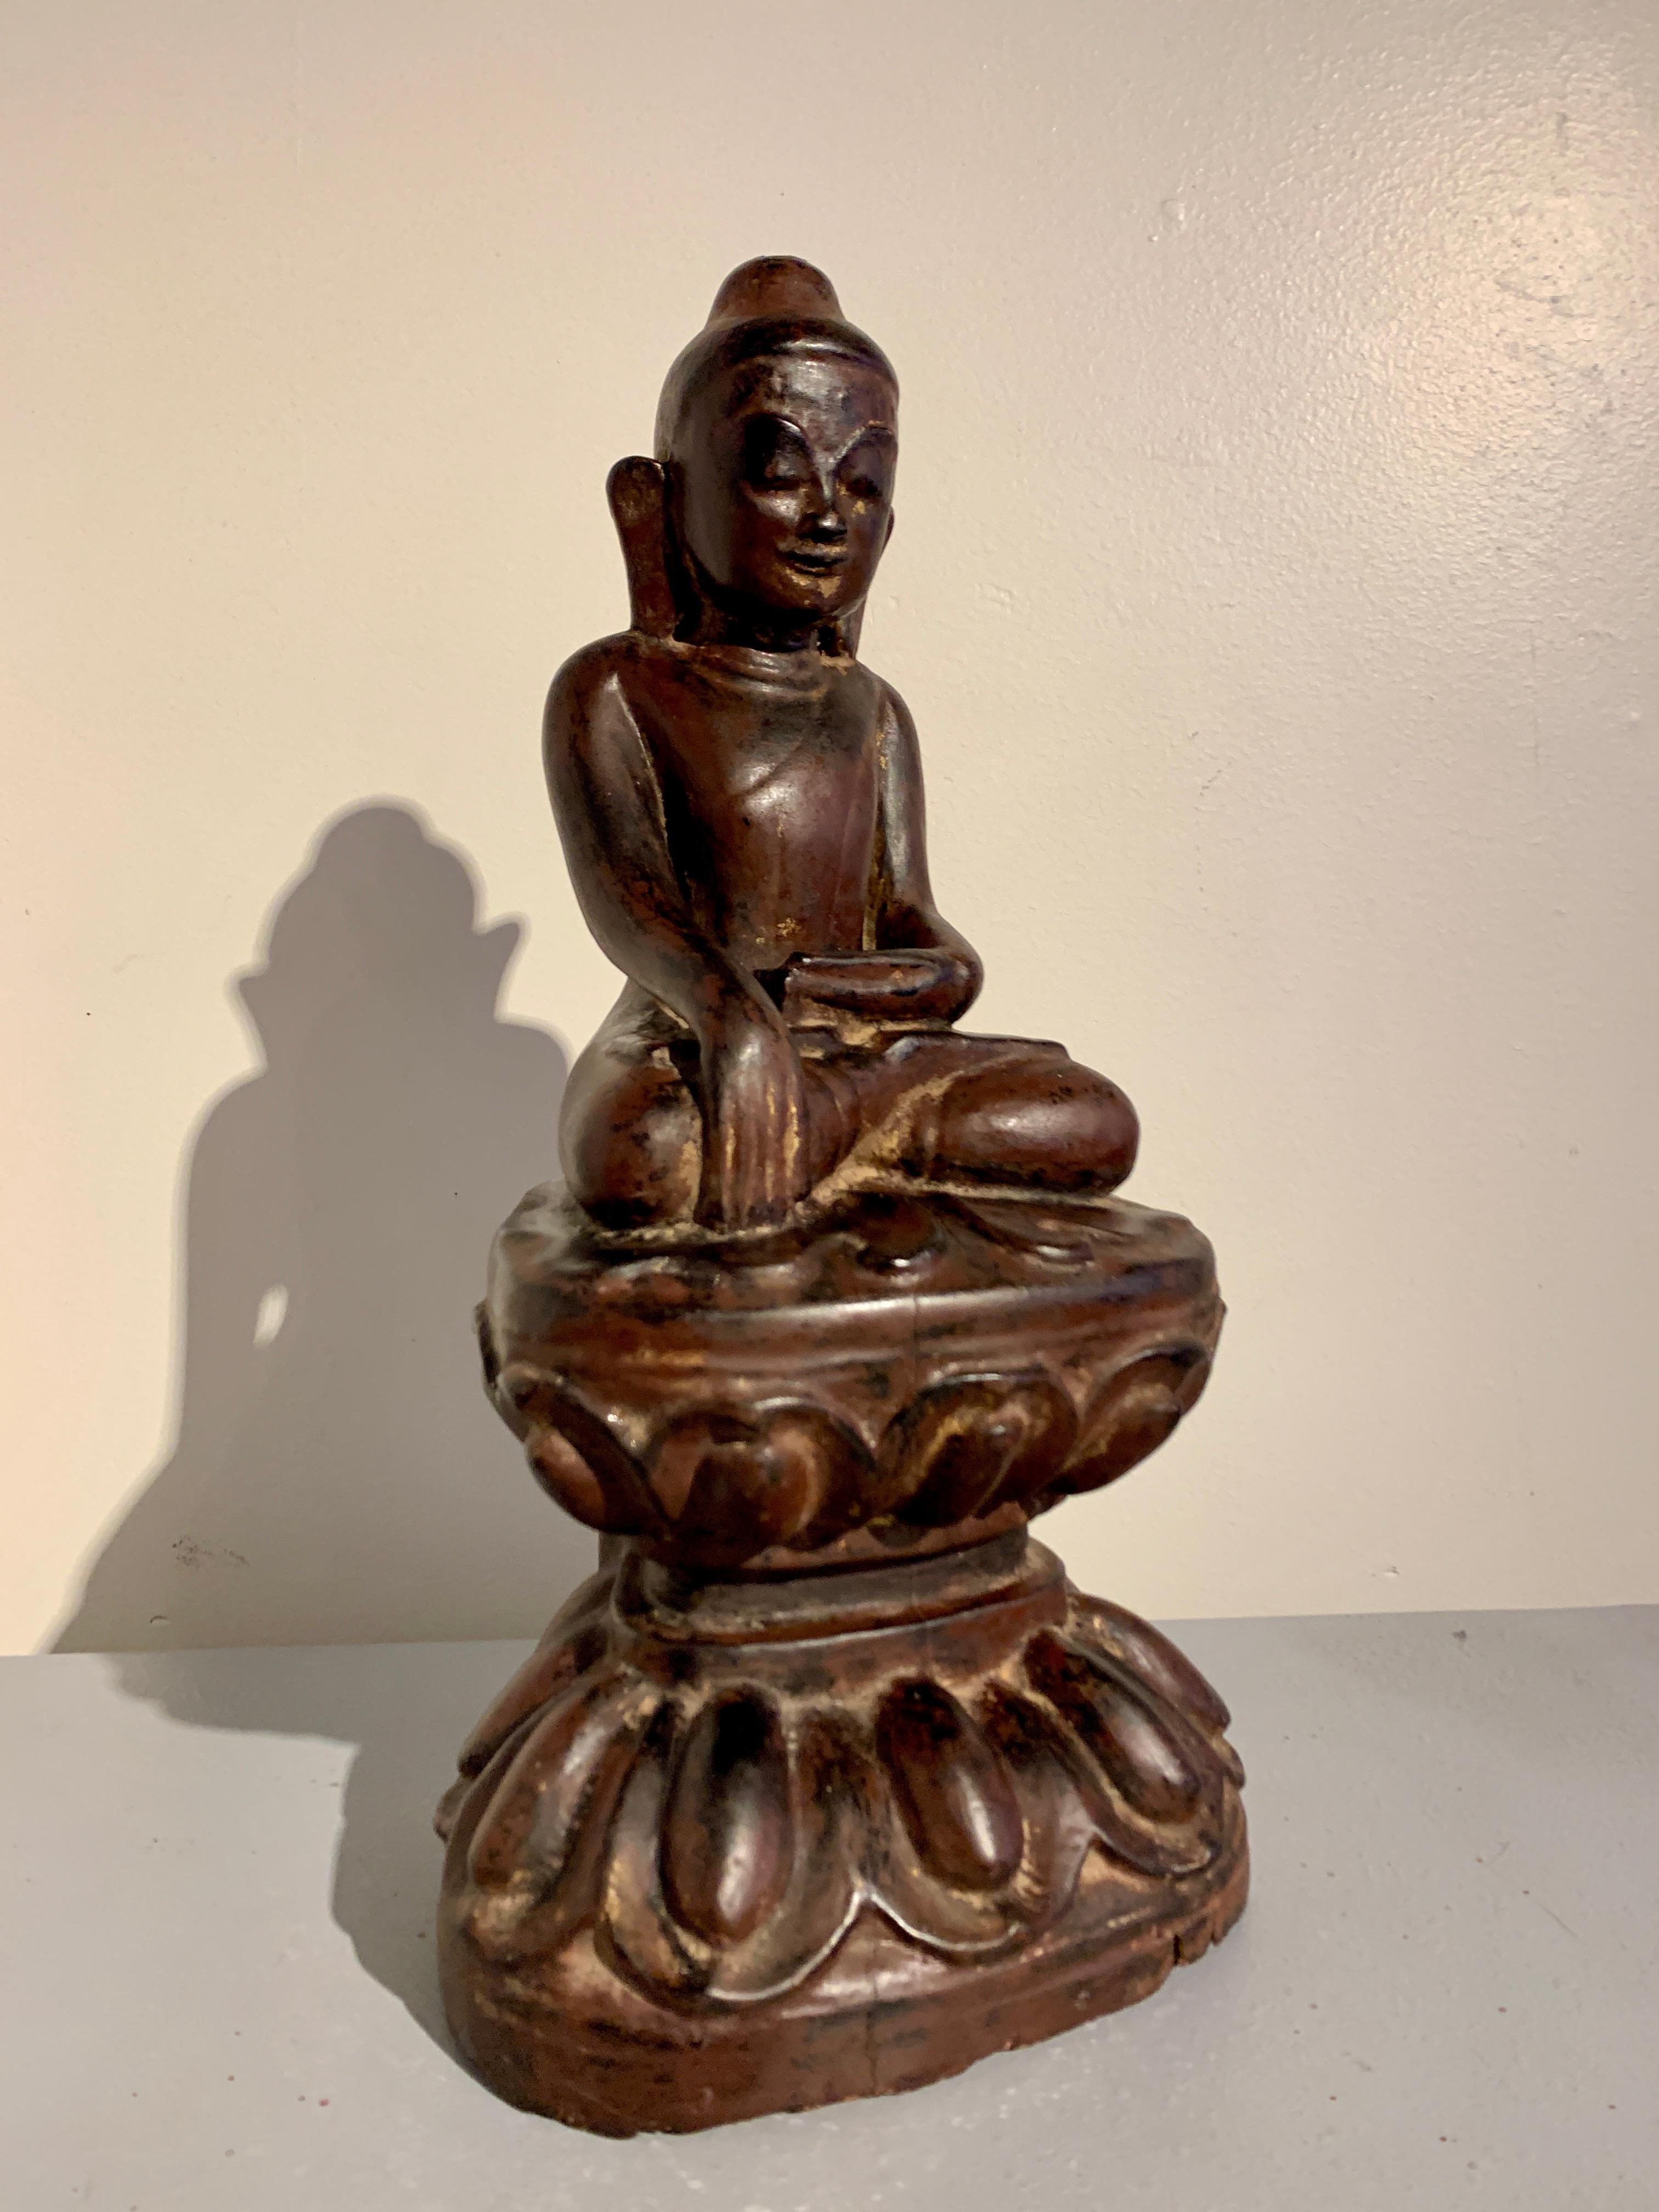 A sweet Burmese carved teak and lacquered image of the Buddha, Shan States, Ava Period, 18th century, Myanmar (Burma).

The Buddha is dressed in simple monastic robes, with one shoulder, arm, and part of his chest bare, the excess material of his